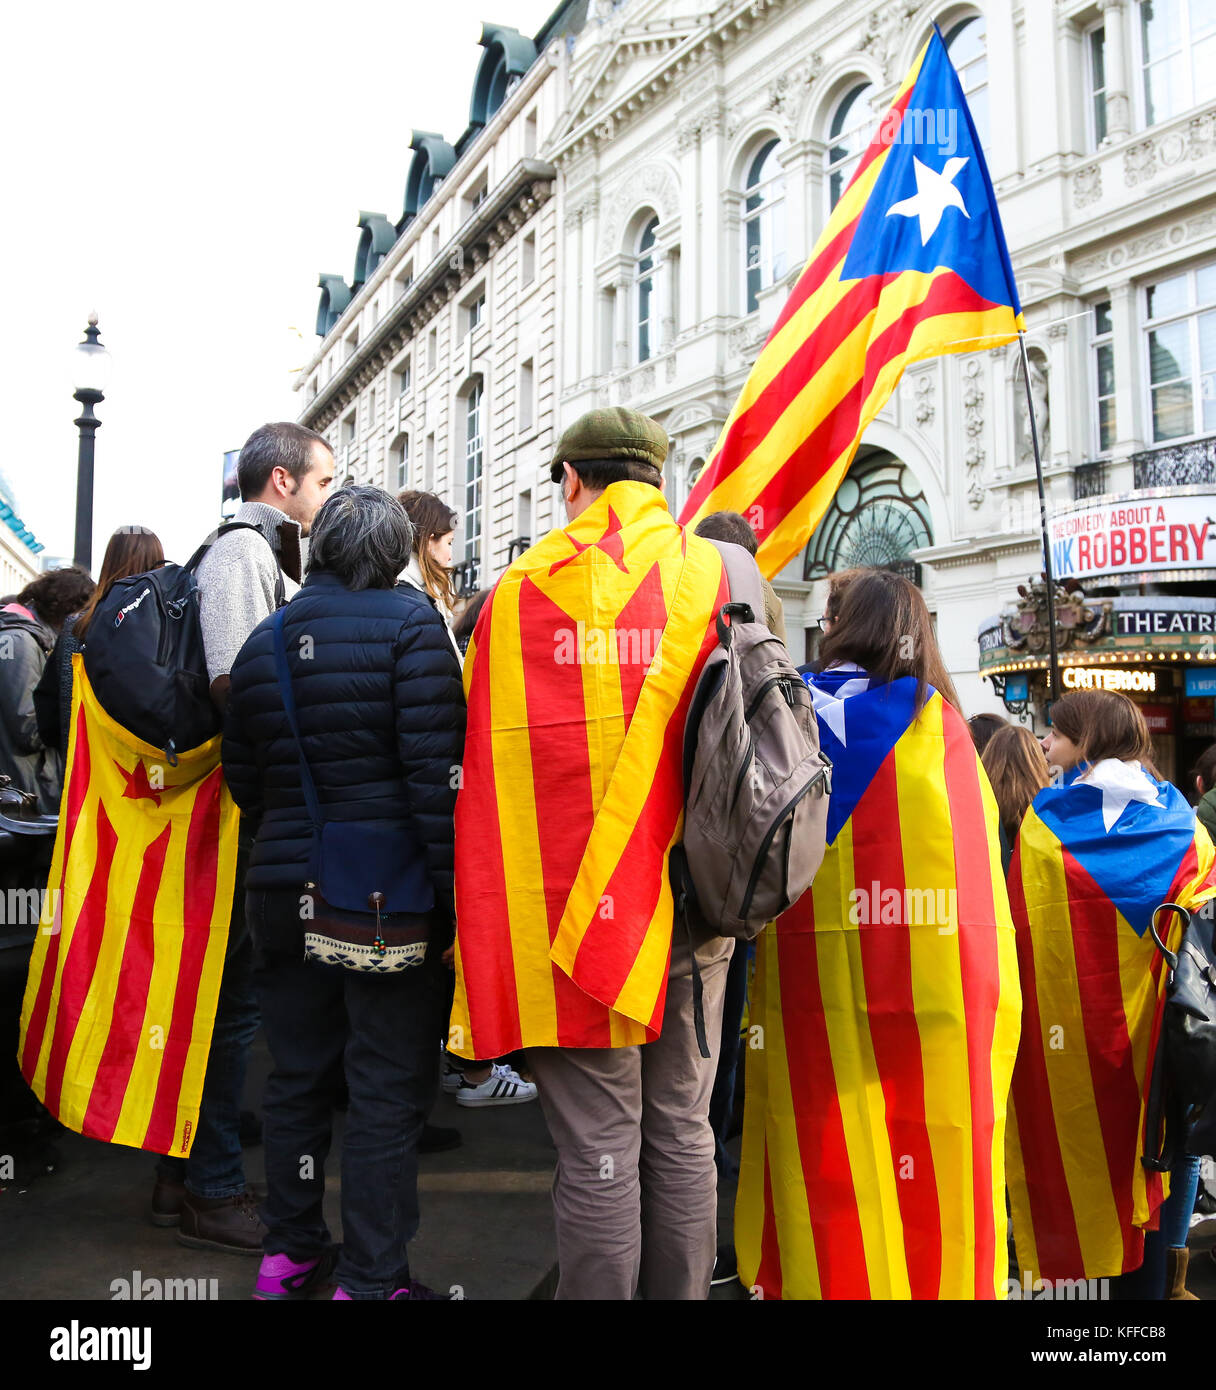 Piccadilly Circus. London. UK 28 Oct 2017 - Demonstrators protest in London’s Piccadilly Circus against Spanish repression and authoritarianism. The protesters demand immediate release of the political prisoners Jordi Cuixart and Jordi Sanchez. They also request the UK Government to condemn the violence towards undefended peaceful civilians during the referendum vote in Catalonia and to recognise the Republic of Catalonia. Credit: Dinendra Haria/Alamy Live News Stock Photo